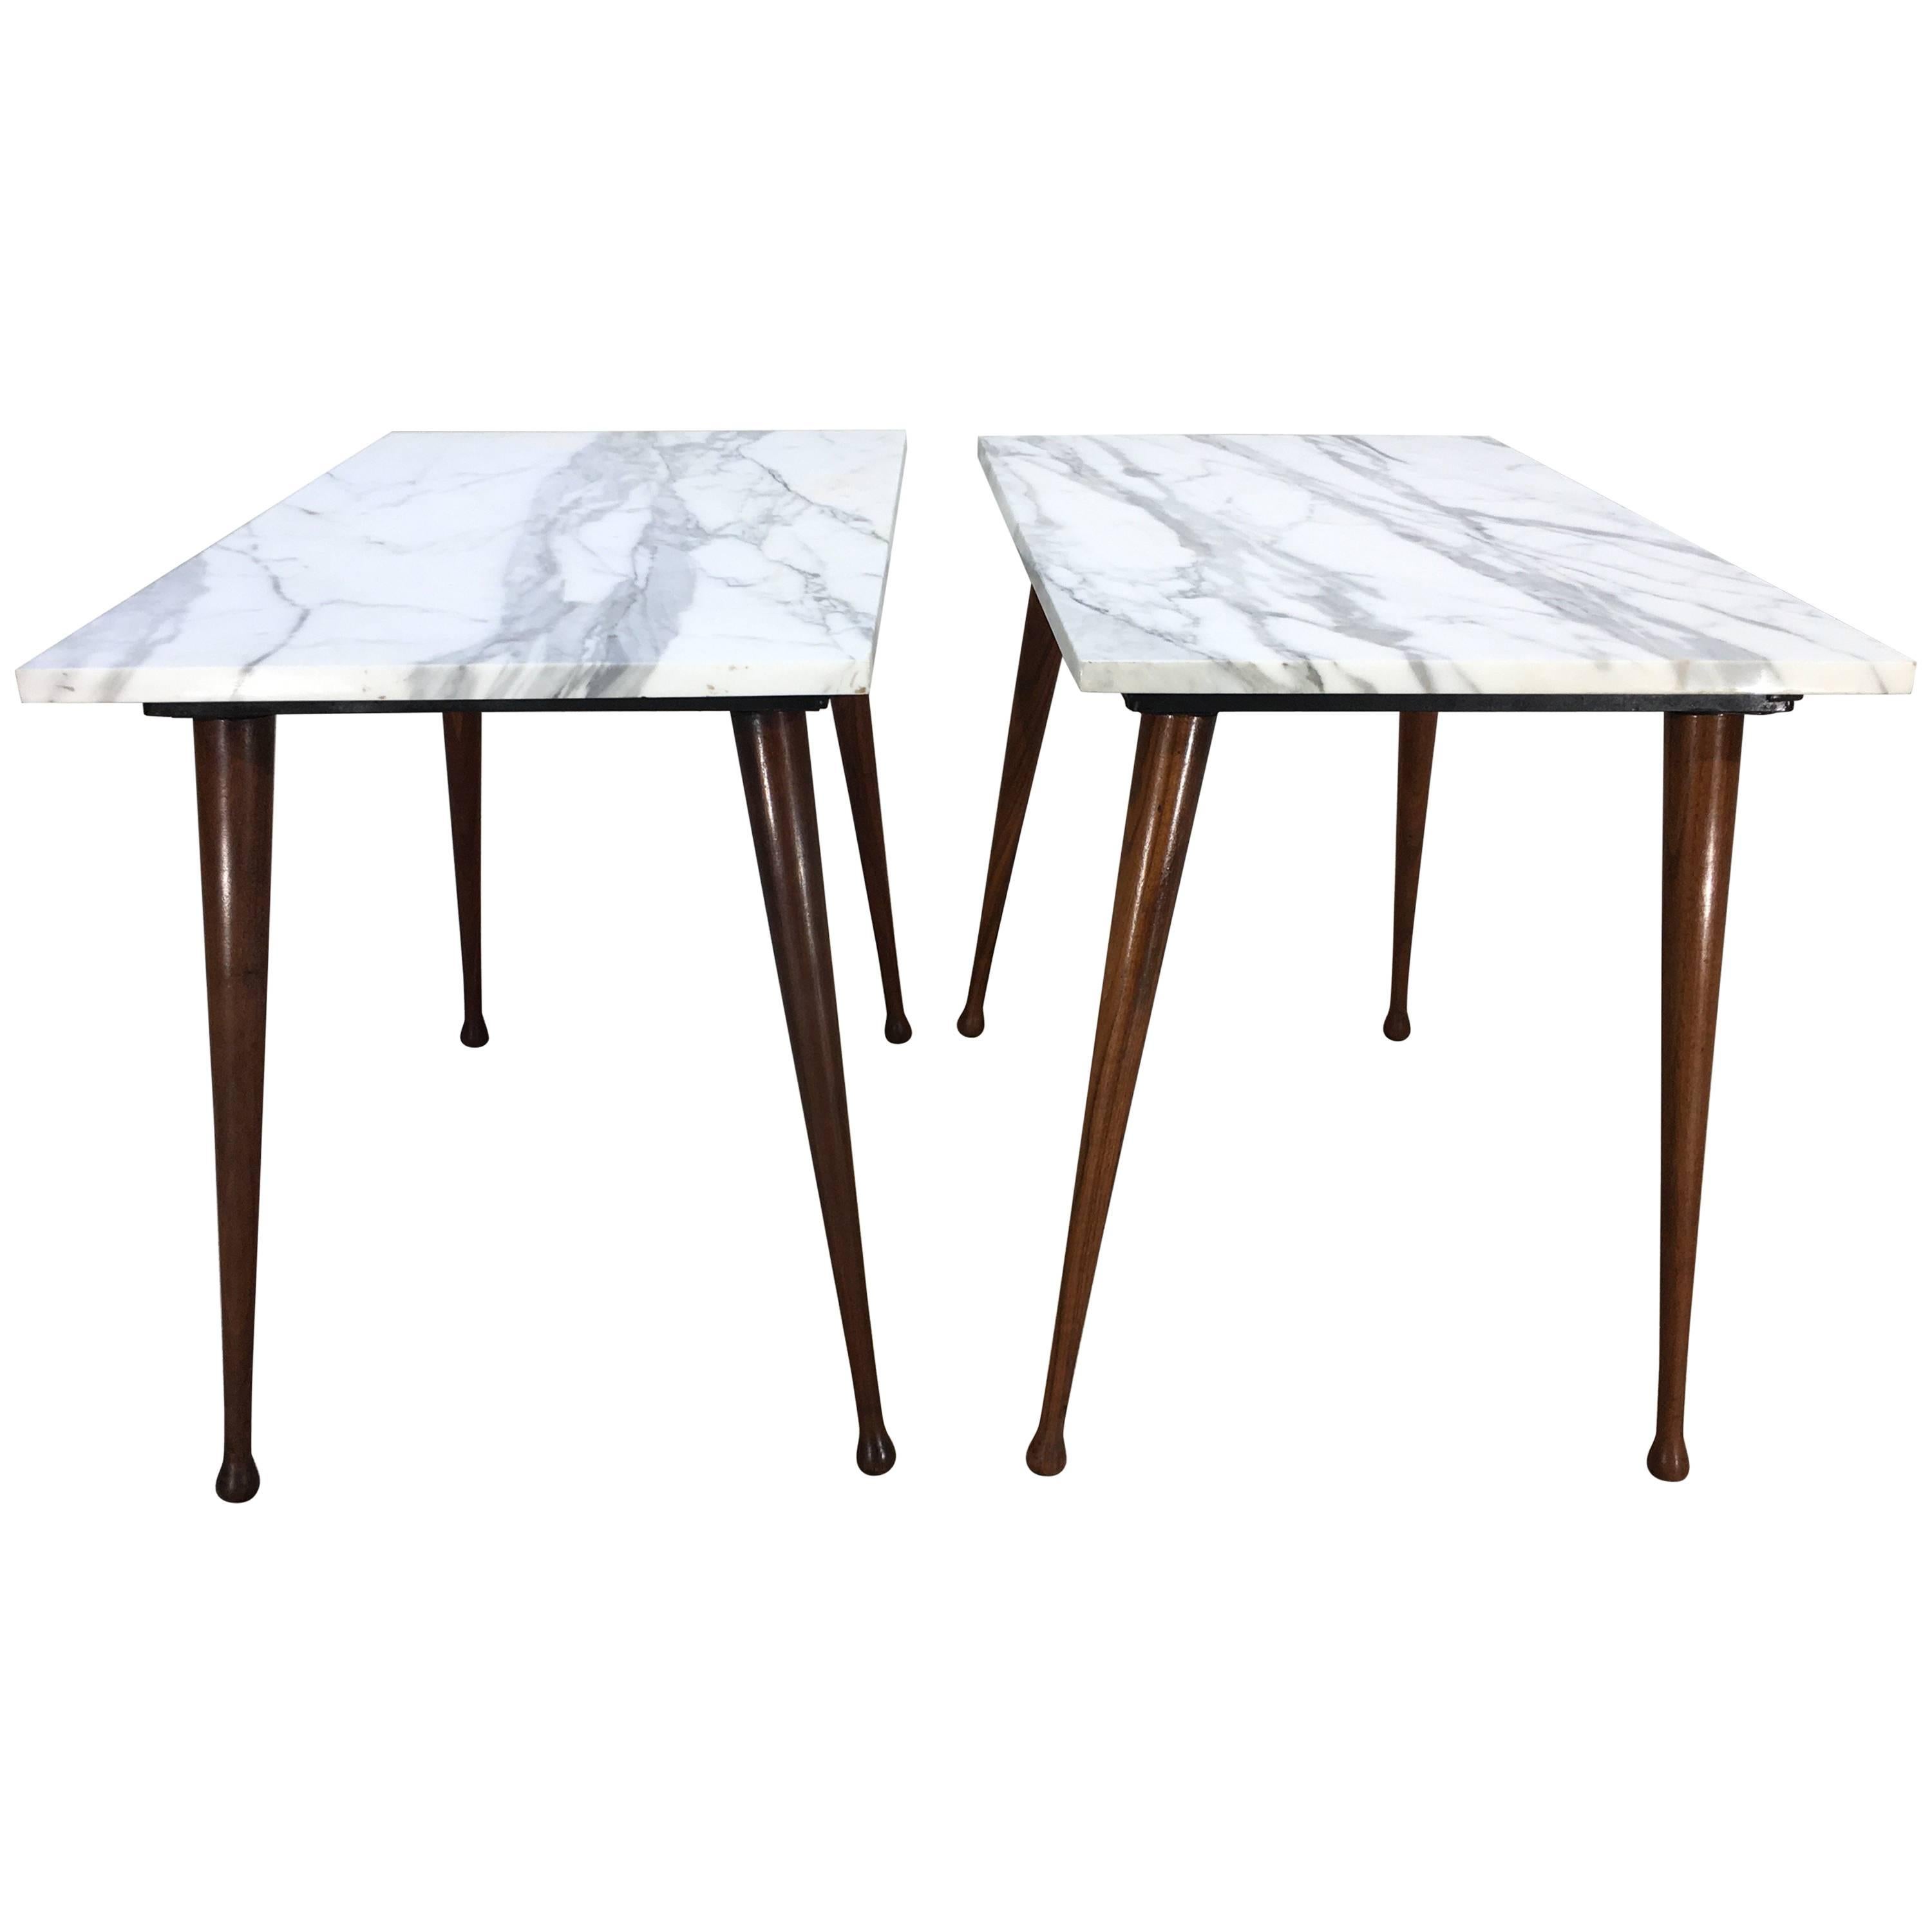 Paul McCobb Carrara Marble-Top Side Tables with Splayed Birch Legs